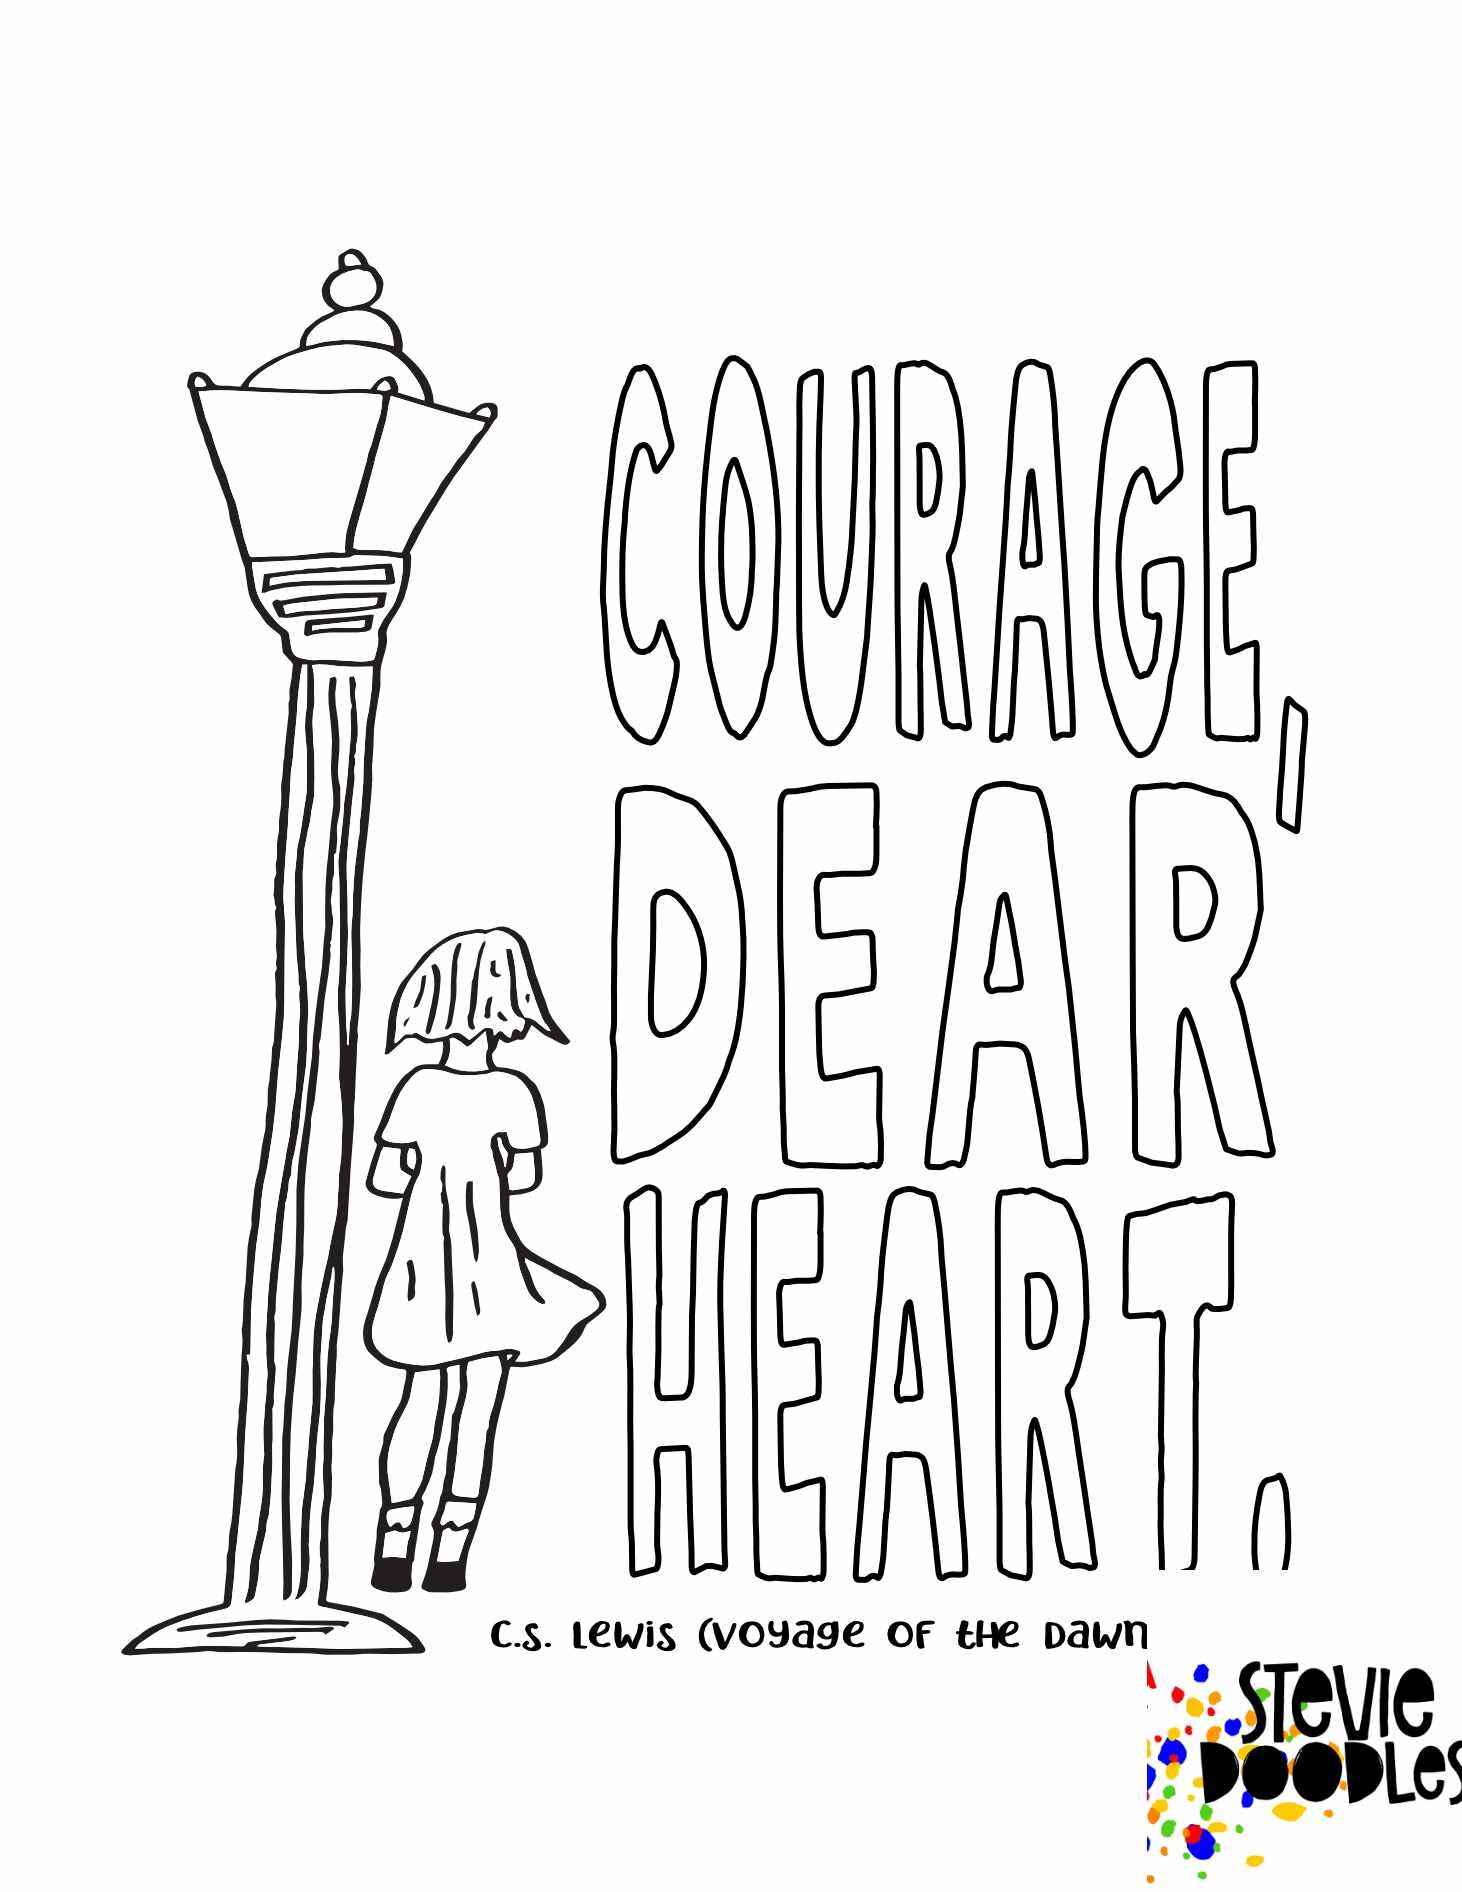 Courage, Dear Heart - Lucy With Lamppost Free Printable Narnia Coloring Page from Stevie Doodles